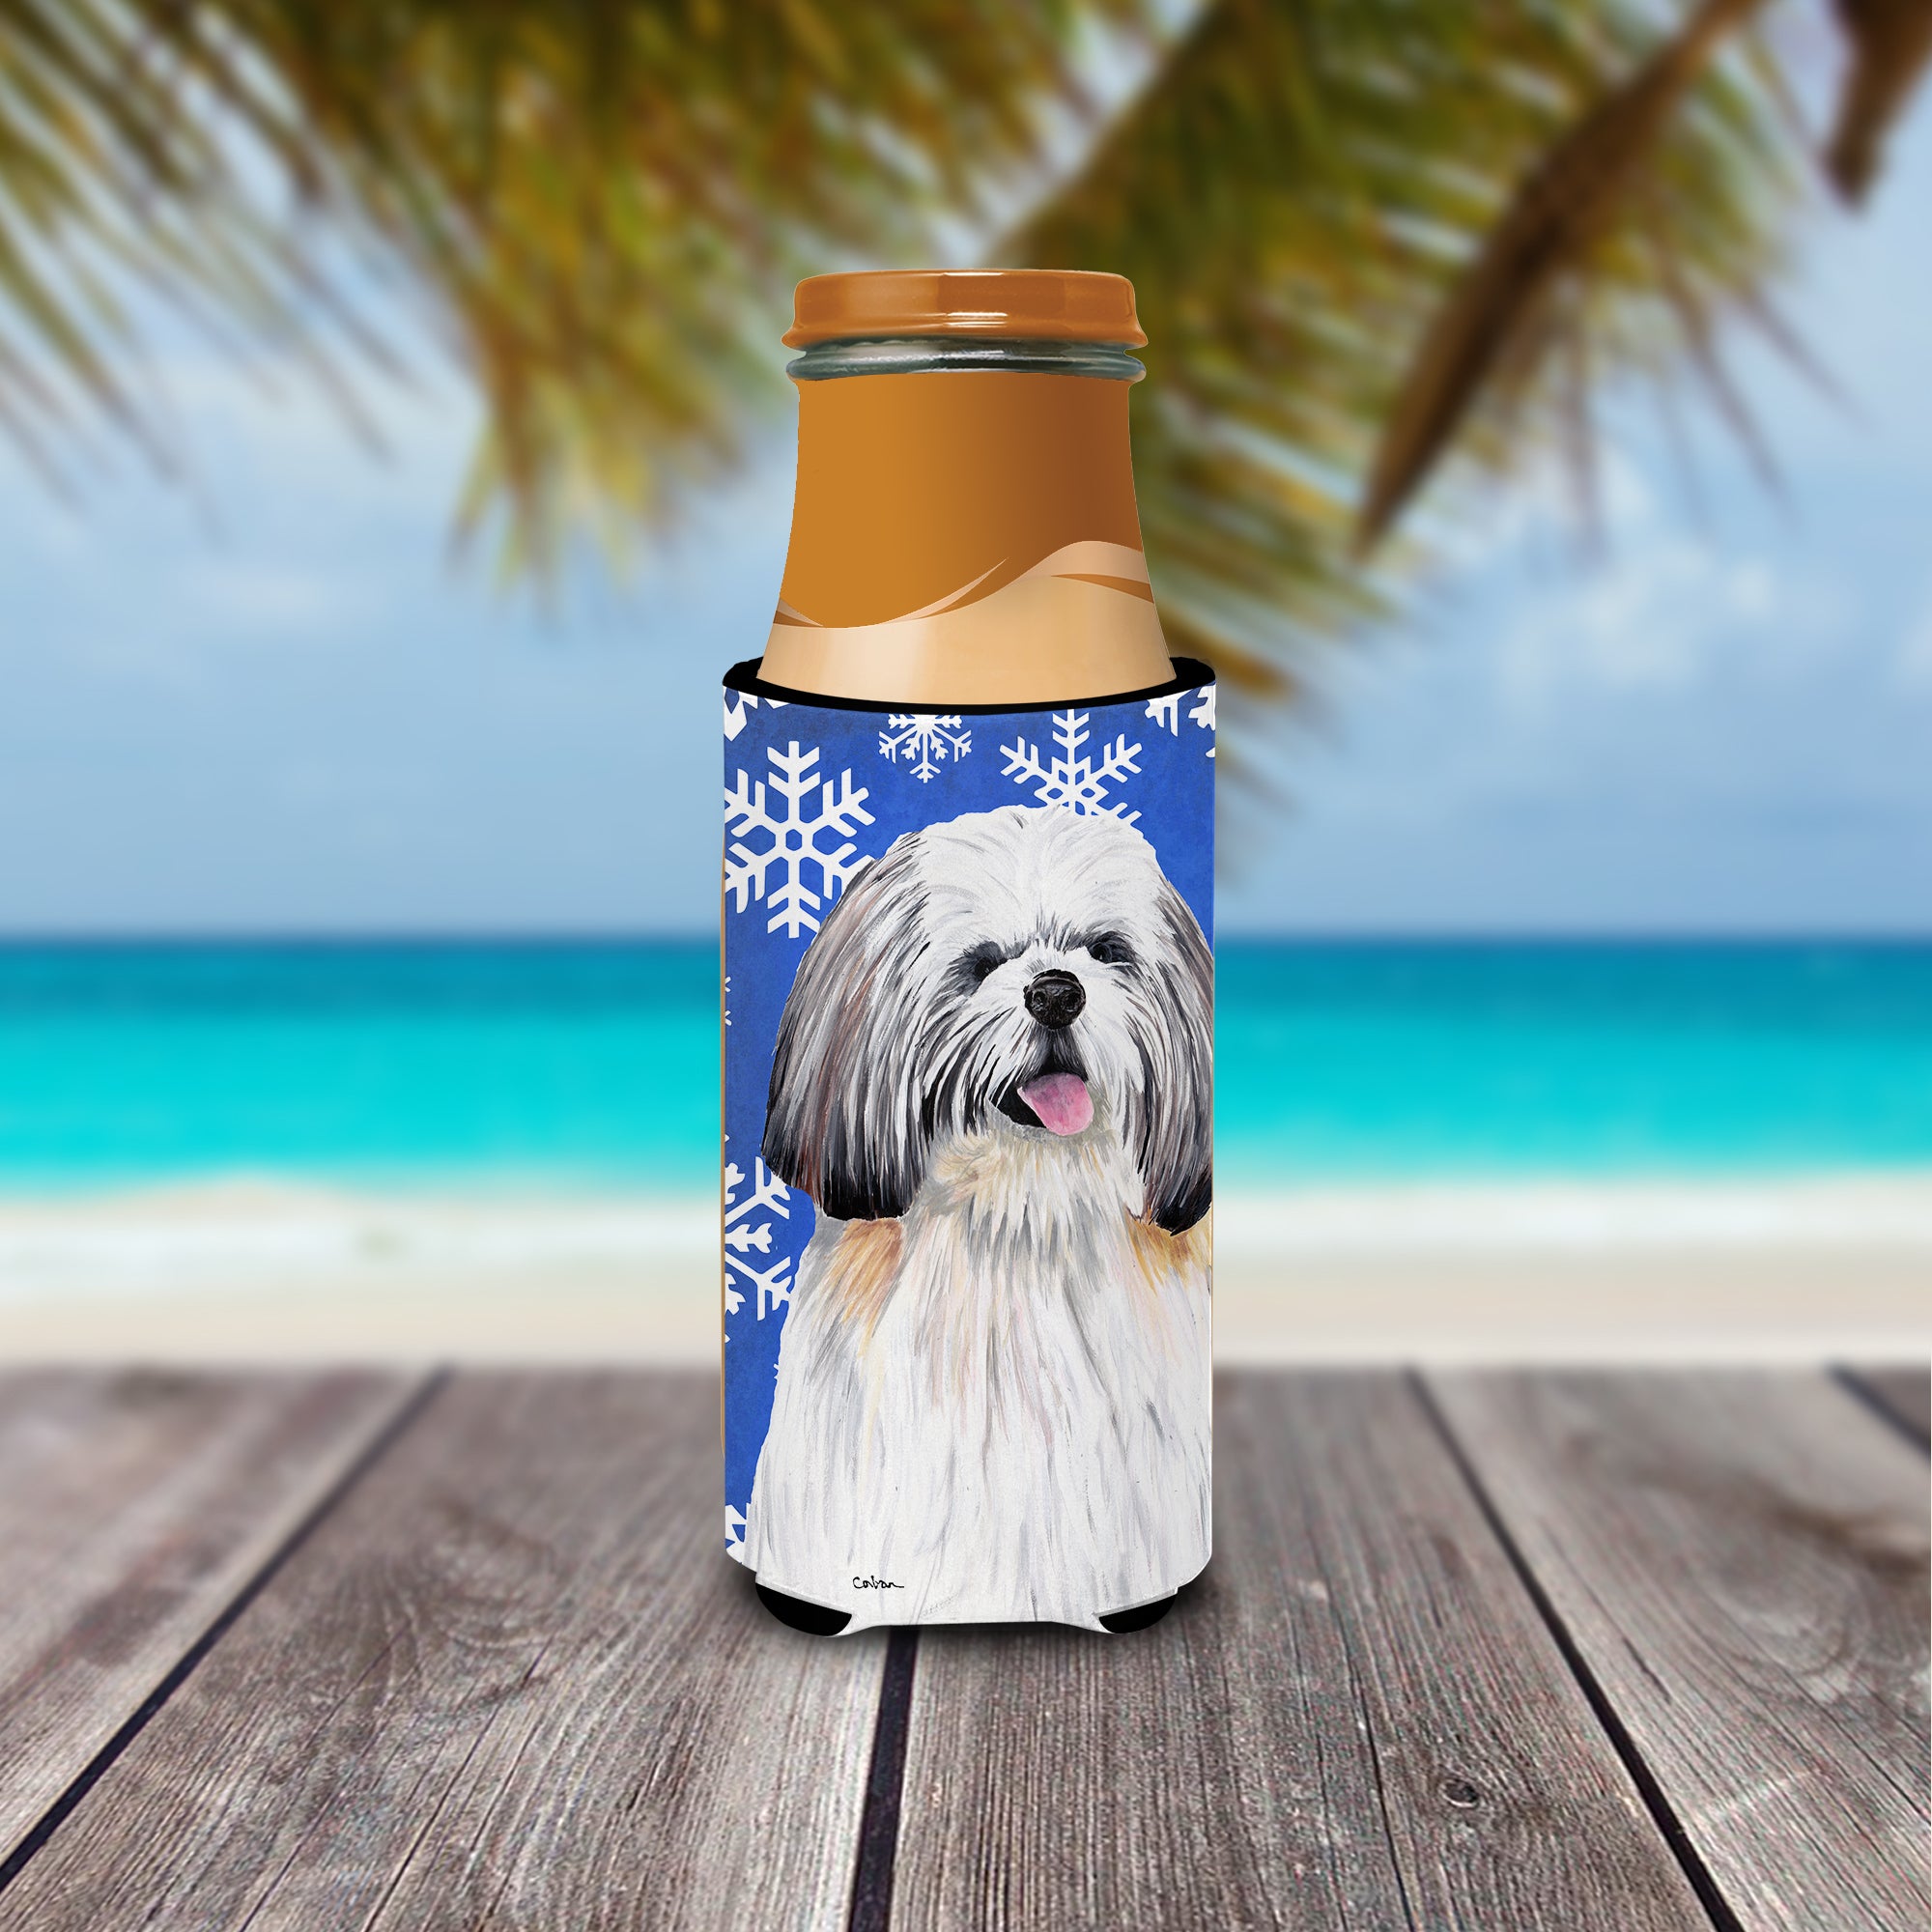 Shih Tzu Winter Snowflakes Holiday Ultra Beverage Insulators for slim cans SC9383MUK